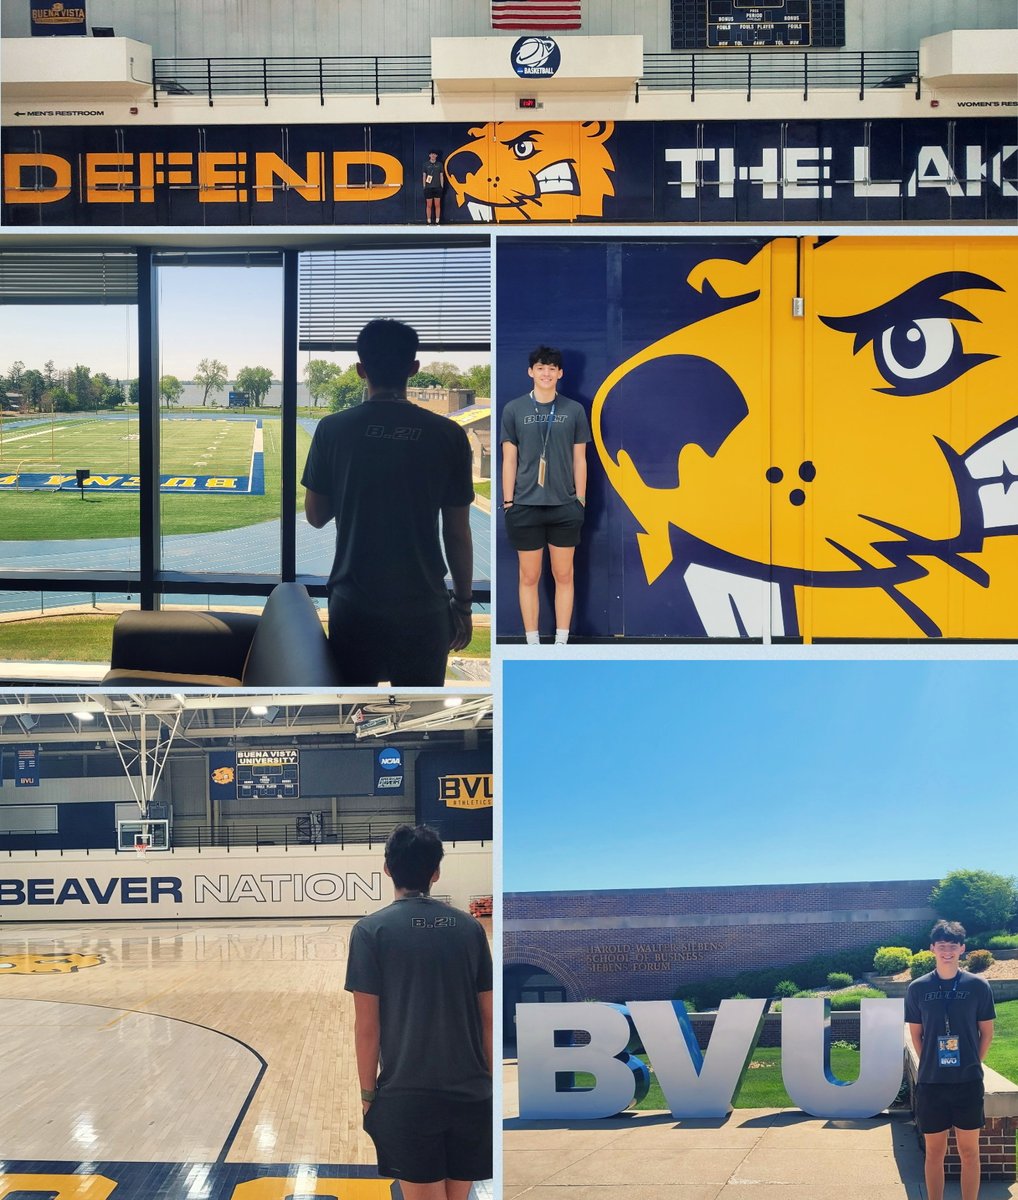 Humbled to receive an offer from @CoachJohnsonBVU to continue to play at the next level with @BVU_Basketball. Thank you to @CoachZJadzak and Coach Johnson for bringing me in to see your amazing campus and facilities.

#RollBeavs
#AGTG
@MayfieldBKB